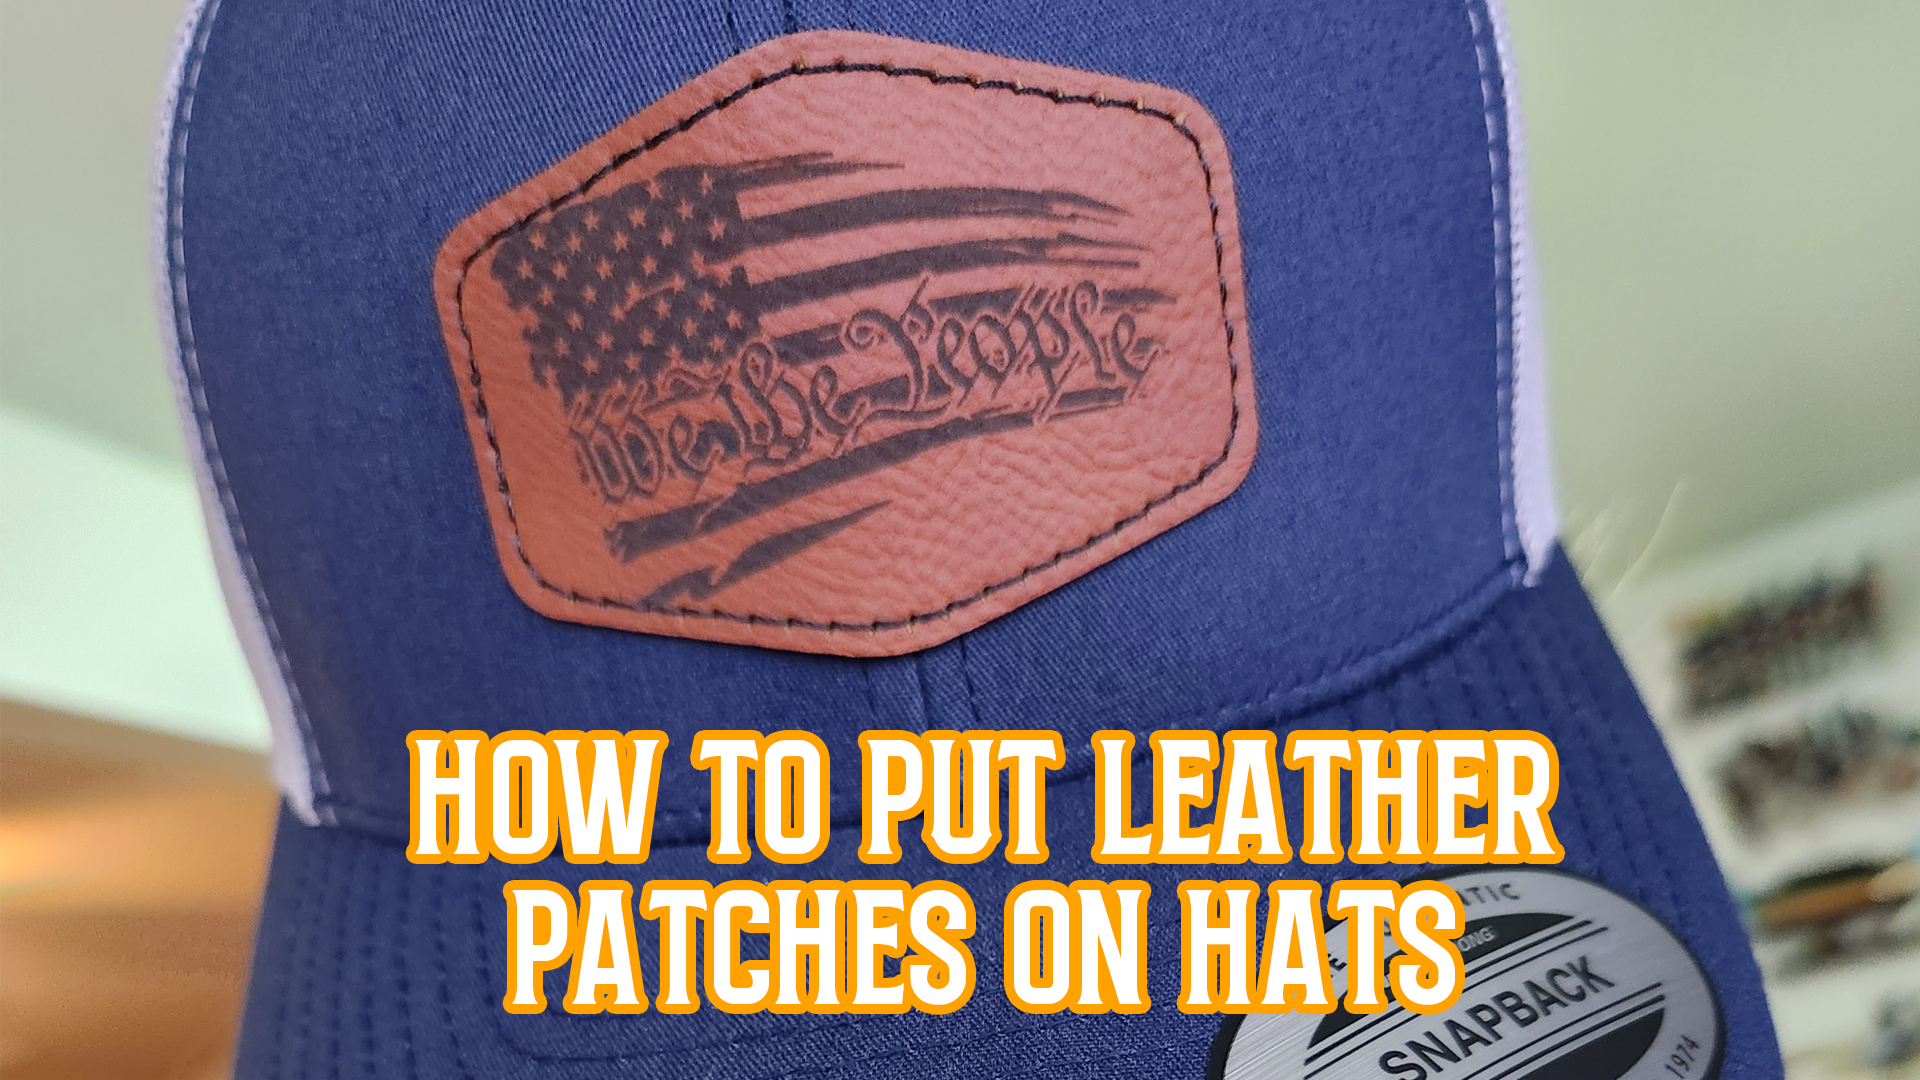 Discover the Art: How Do You Put Leather Patches on Hats?